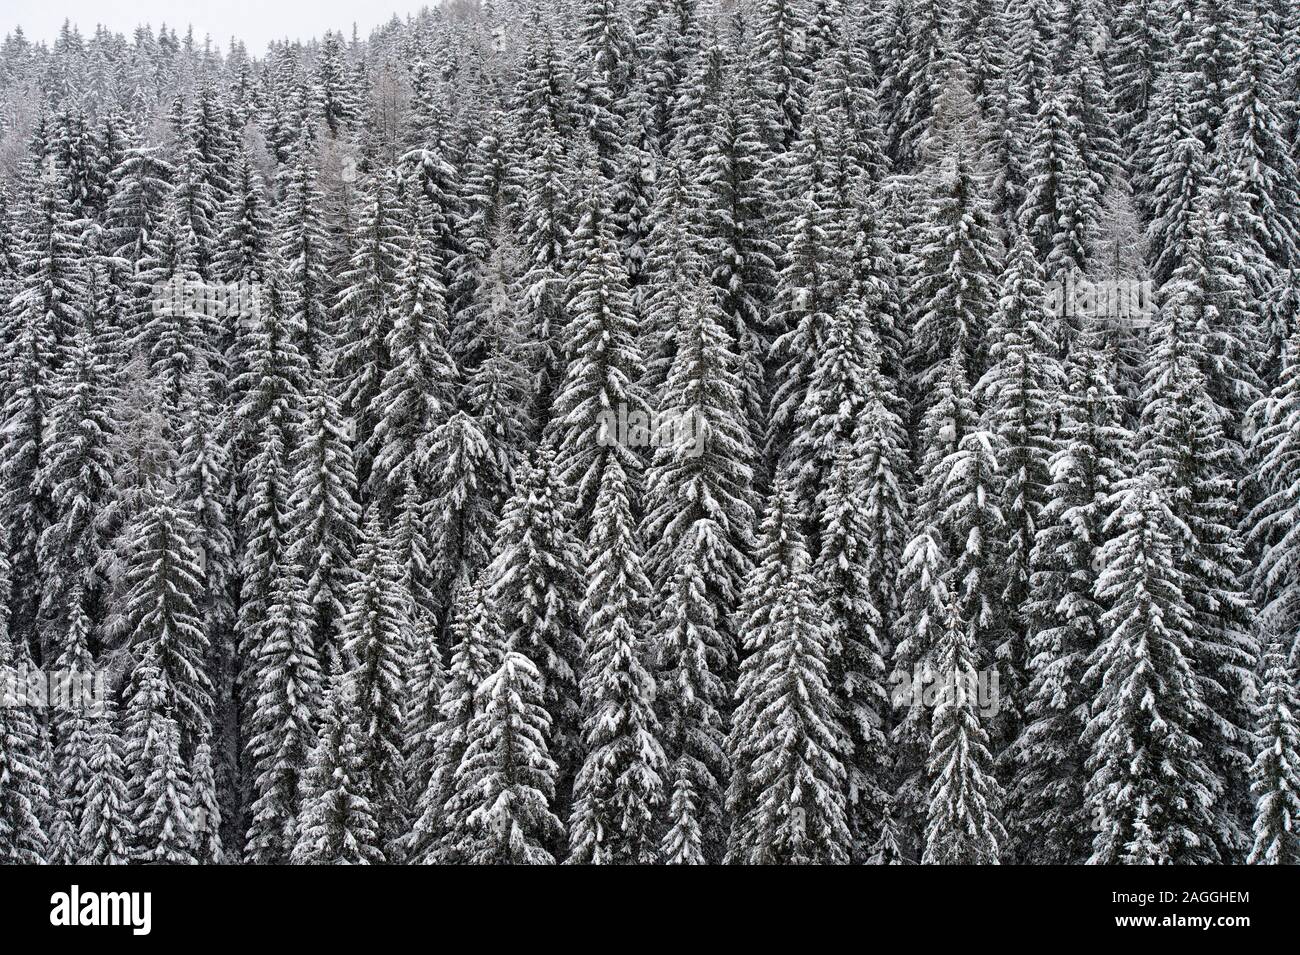 Snow-covered spruces in a forest on a grey winter day, Alta Badia, Dolomites, South Tyrol, Italy Stock Photo